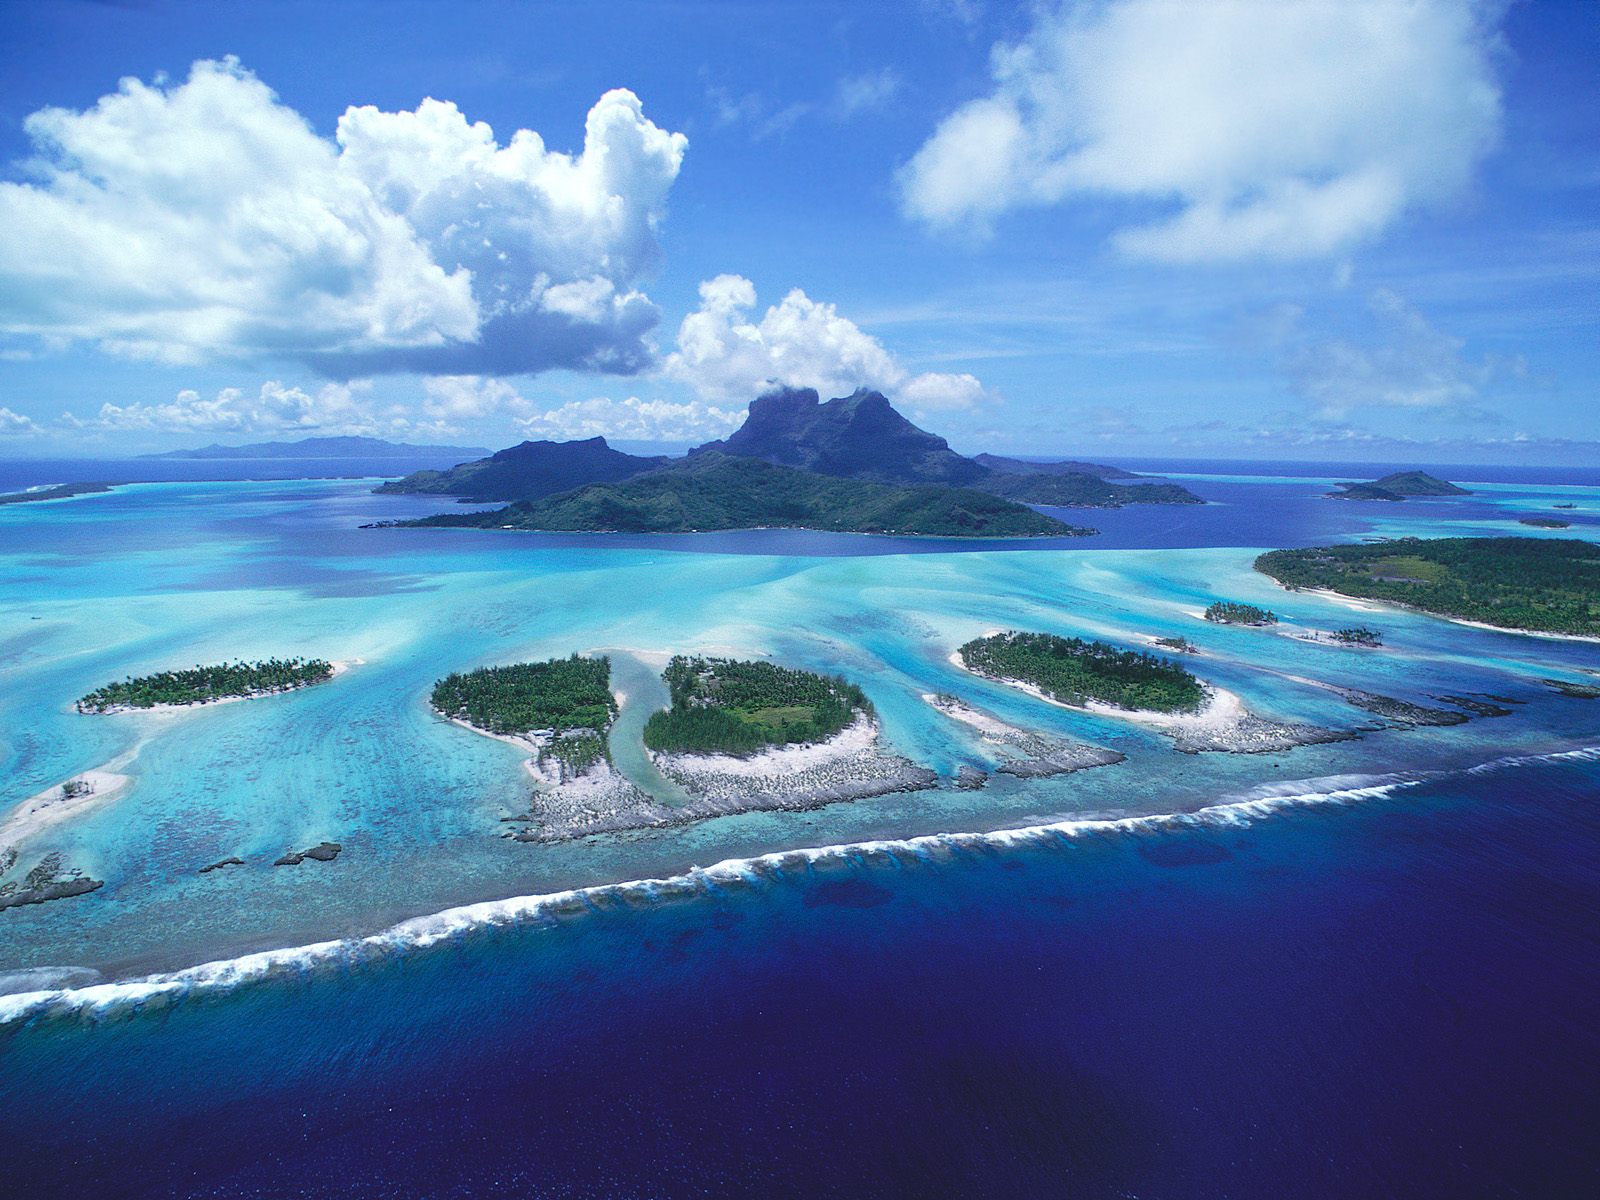 Bora-Bora, a stunning view of French Polynesia's turquoise waters and lush landscape.